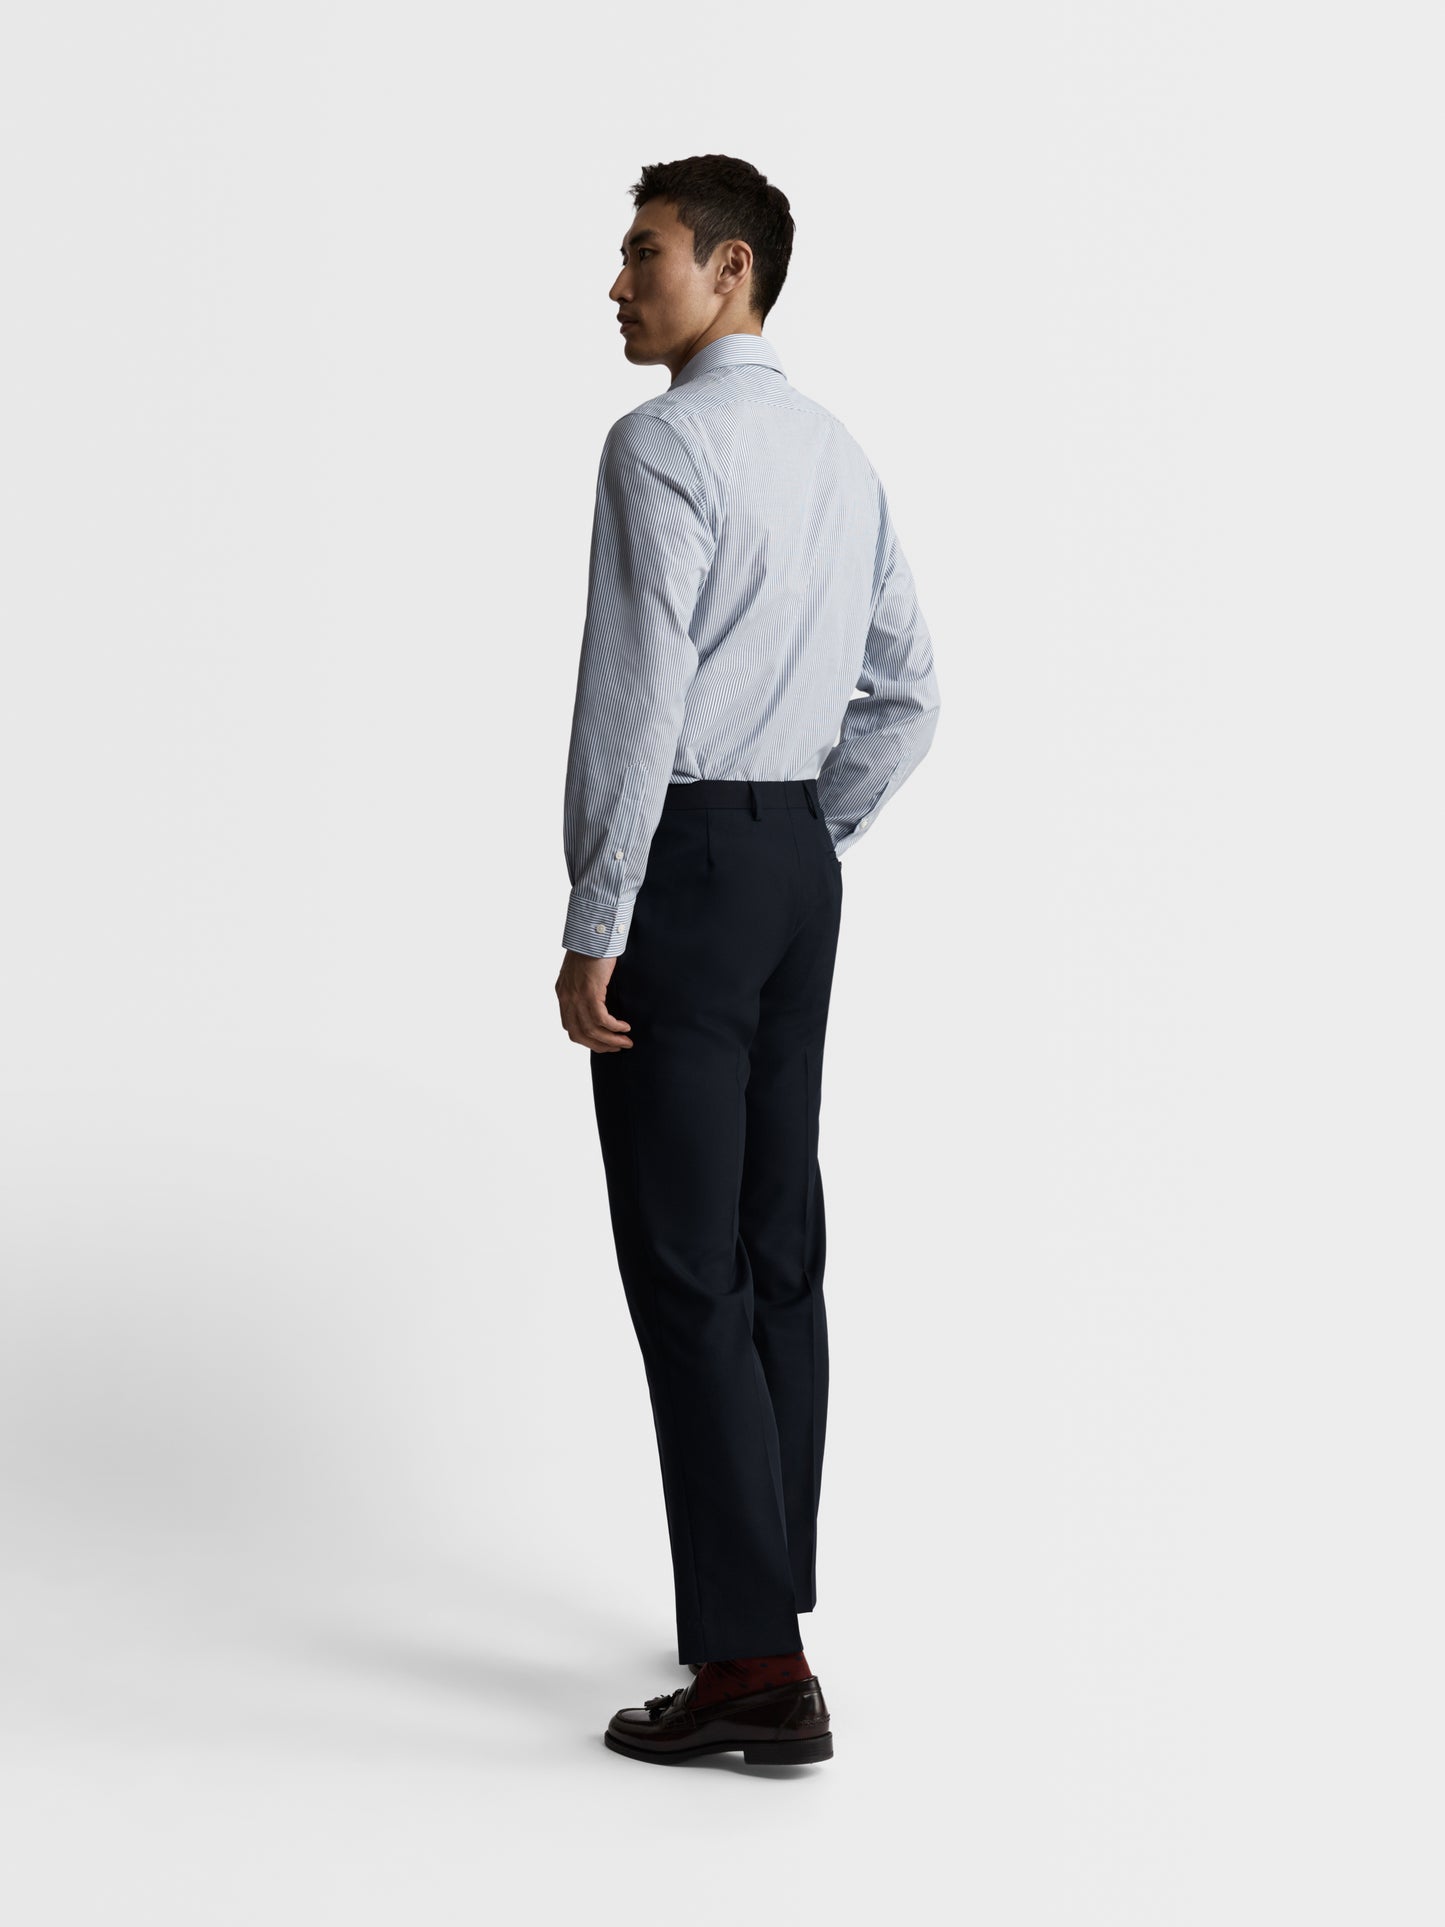 Image 4 of Max Performance Navy Blue Bengal Stripe Plain Weave Fitted Single Cuff Classic Collar Shirt